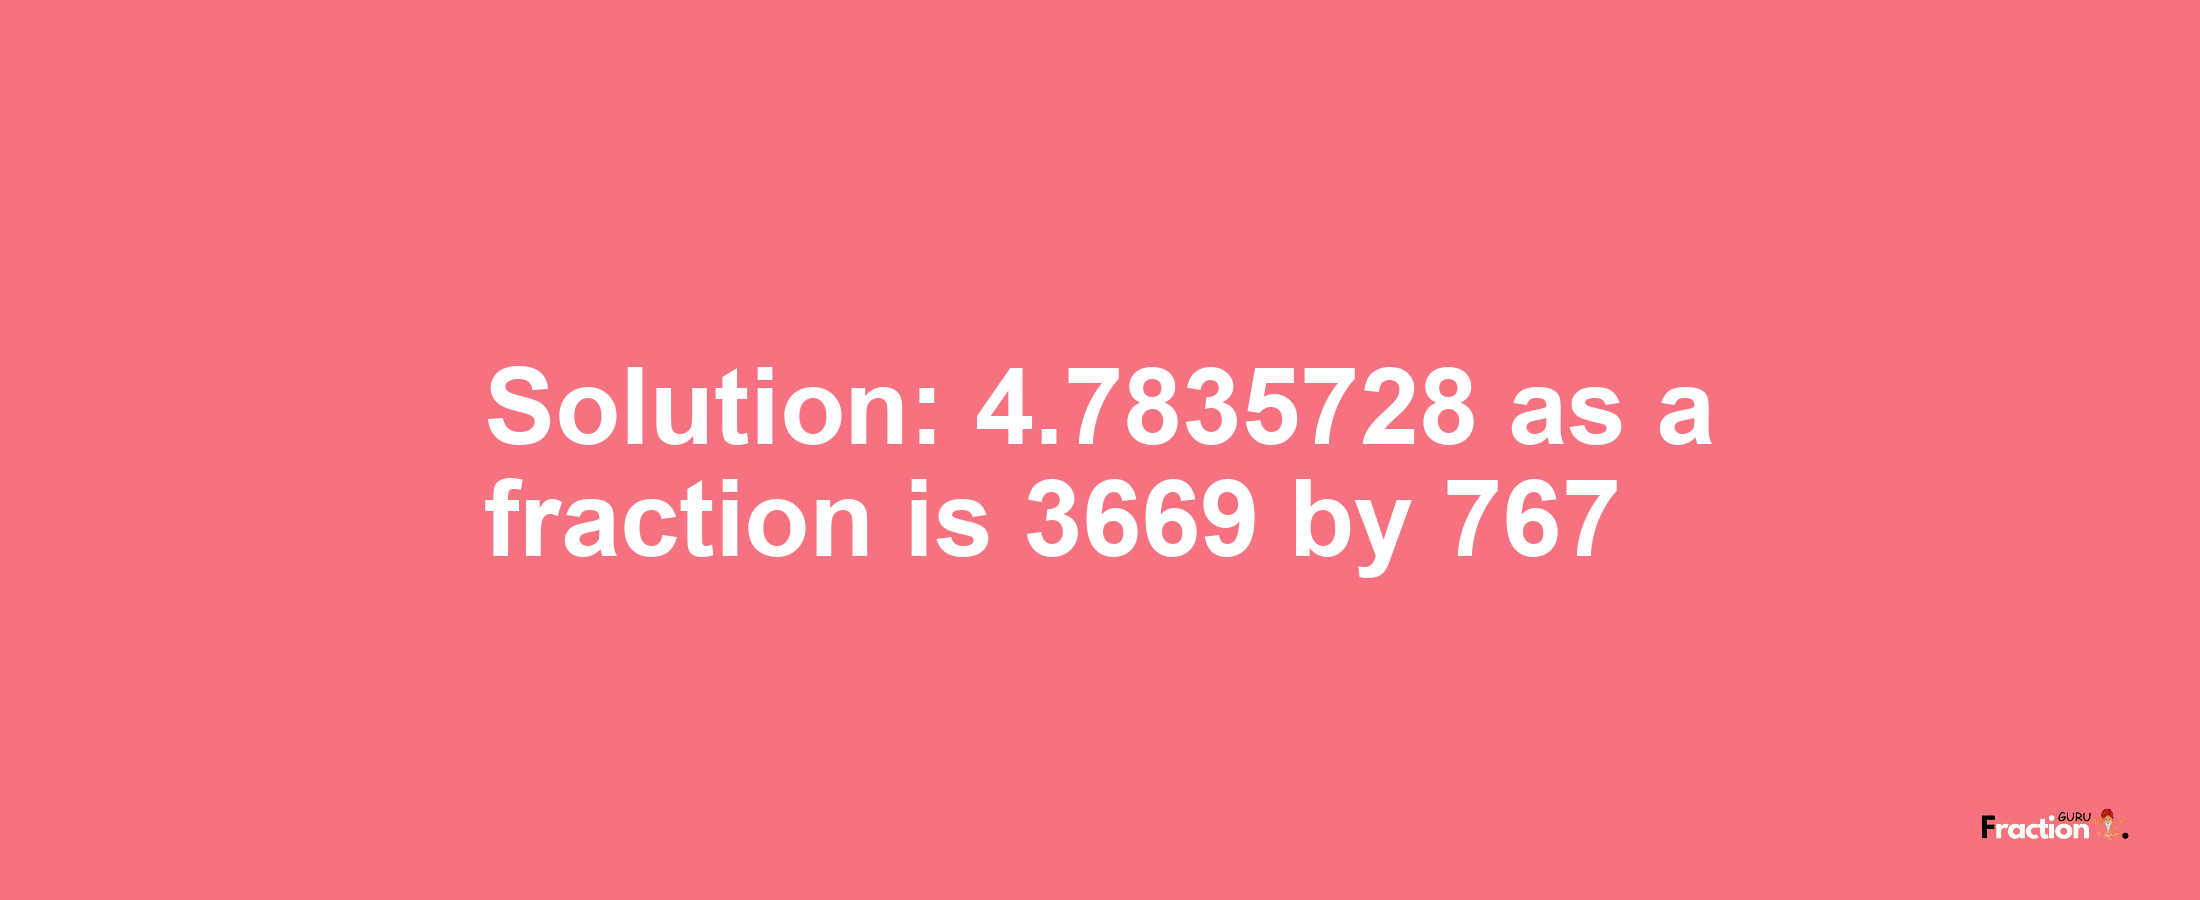 Solution:4.7835728 as a fraction is 3669/767